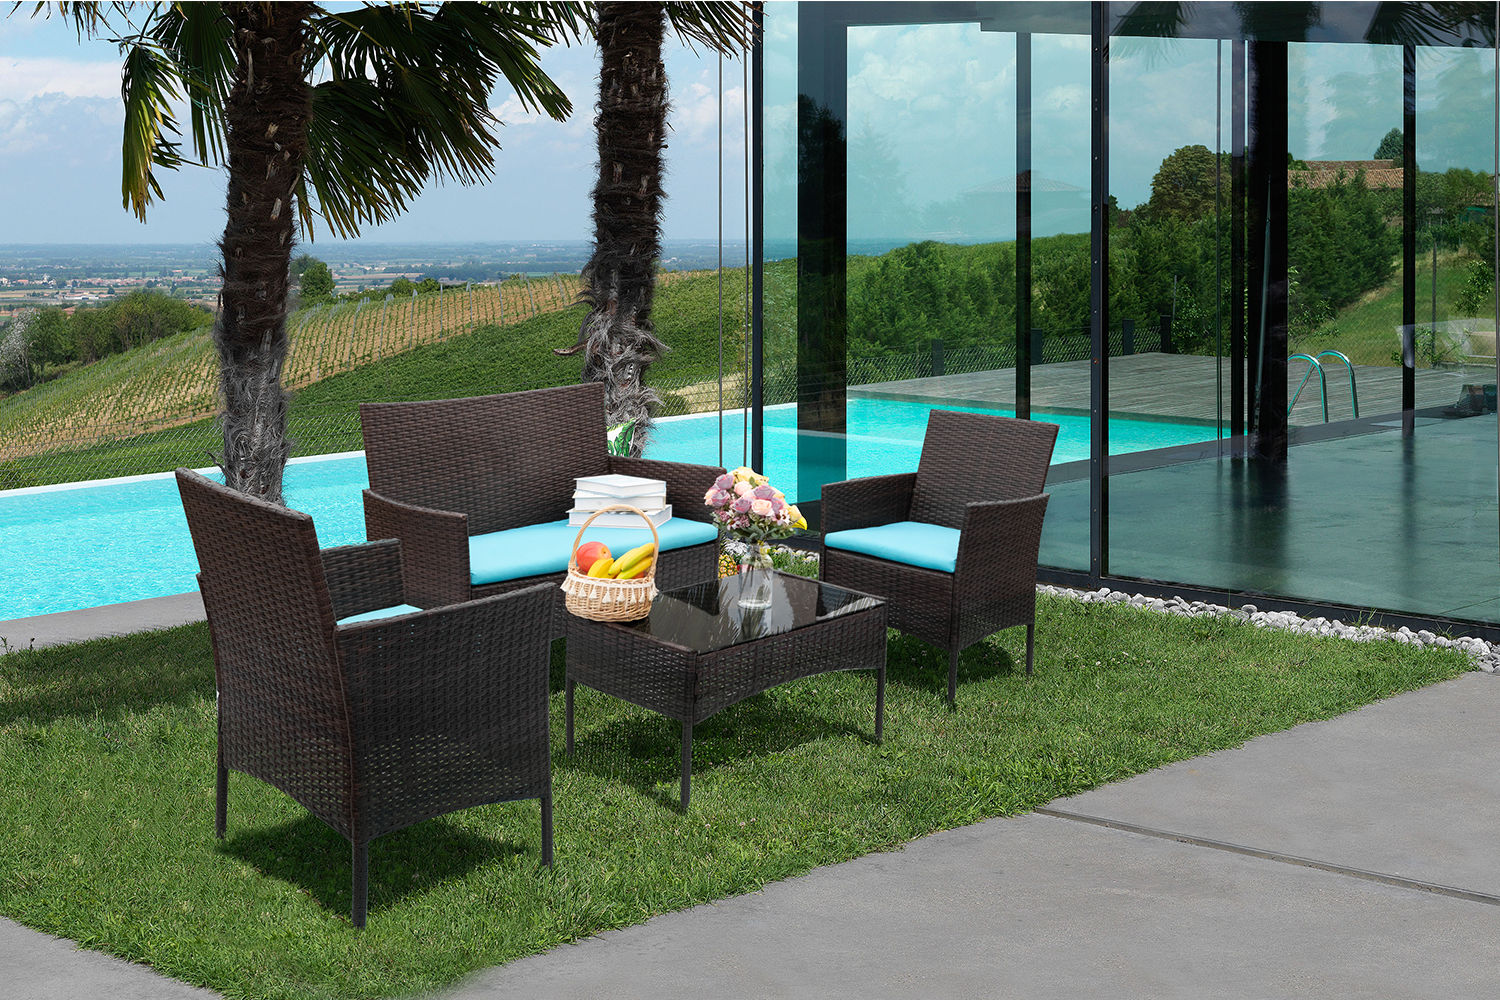 Lacoo 4 Pieces Outdoor Patio Furniture Brown PE Rattan Wicker Table and Chairs Set Bar Balcony Backyard Garden Porch Sets with Cushioned Tempered Glass, Blue Cushion - image 2 of 4